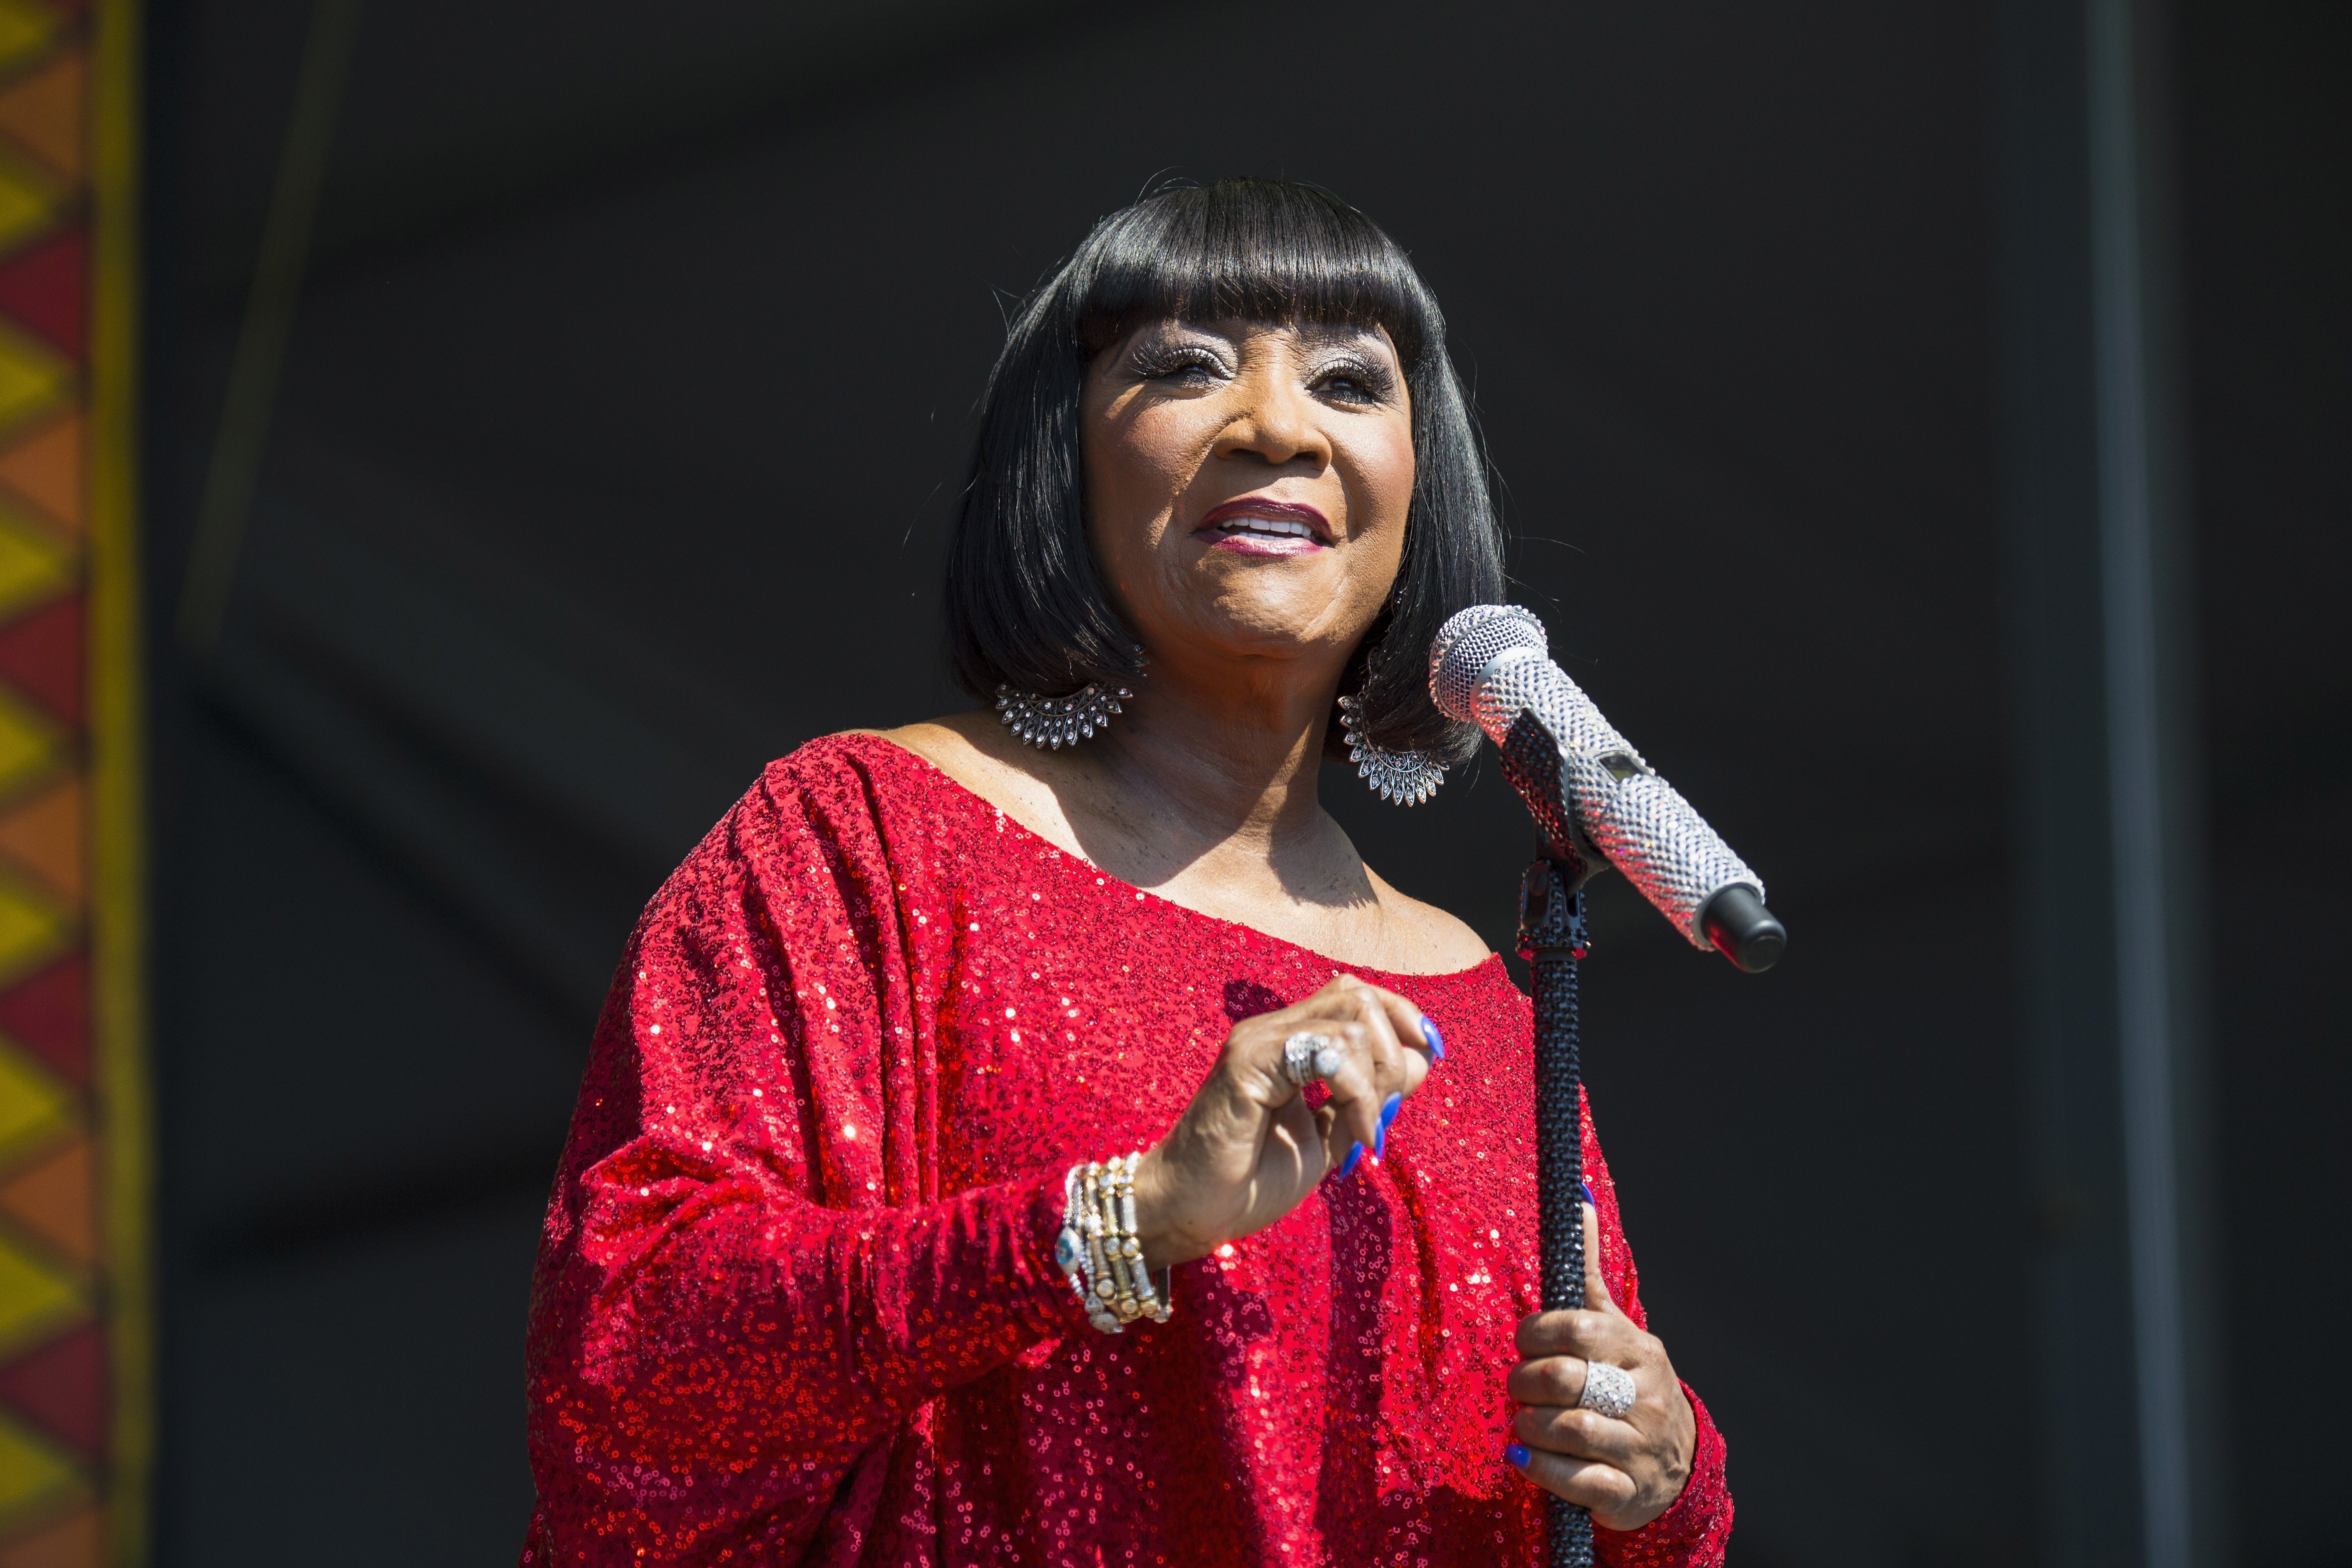 Patti LaBelle performs during the 2017 New Orleans Jazz & Heritage Festival at Fair Grounds Race Course on May 7, 2017 | Source: Getty Images